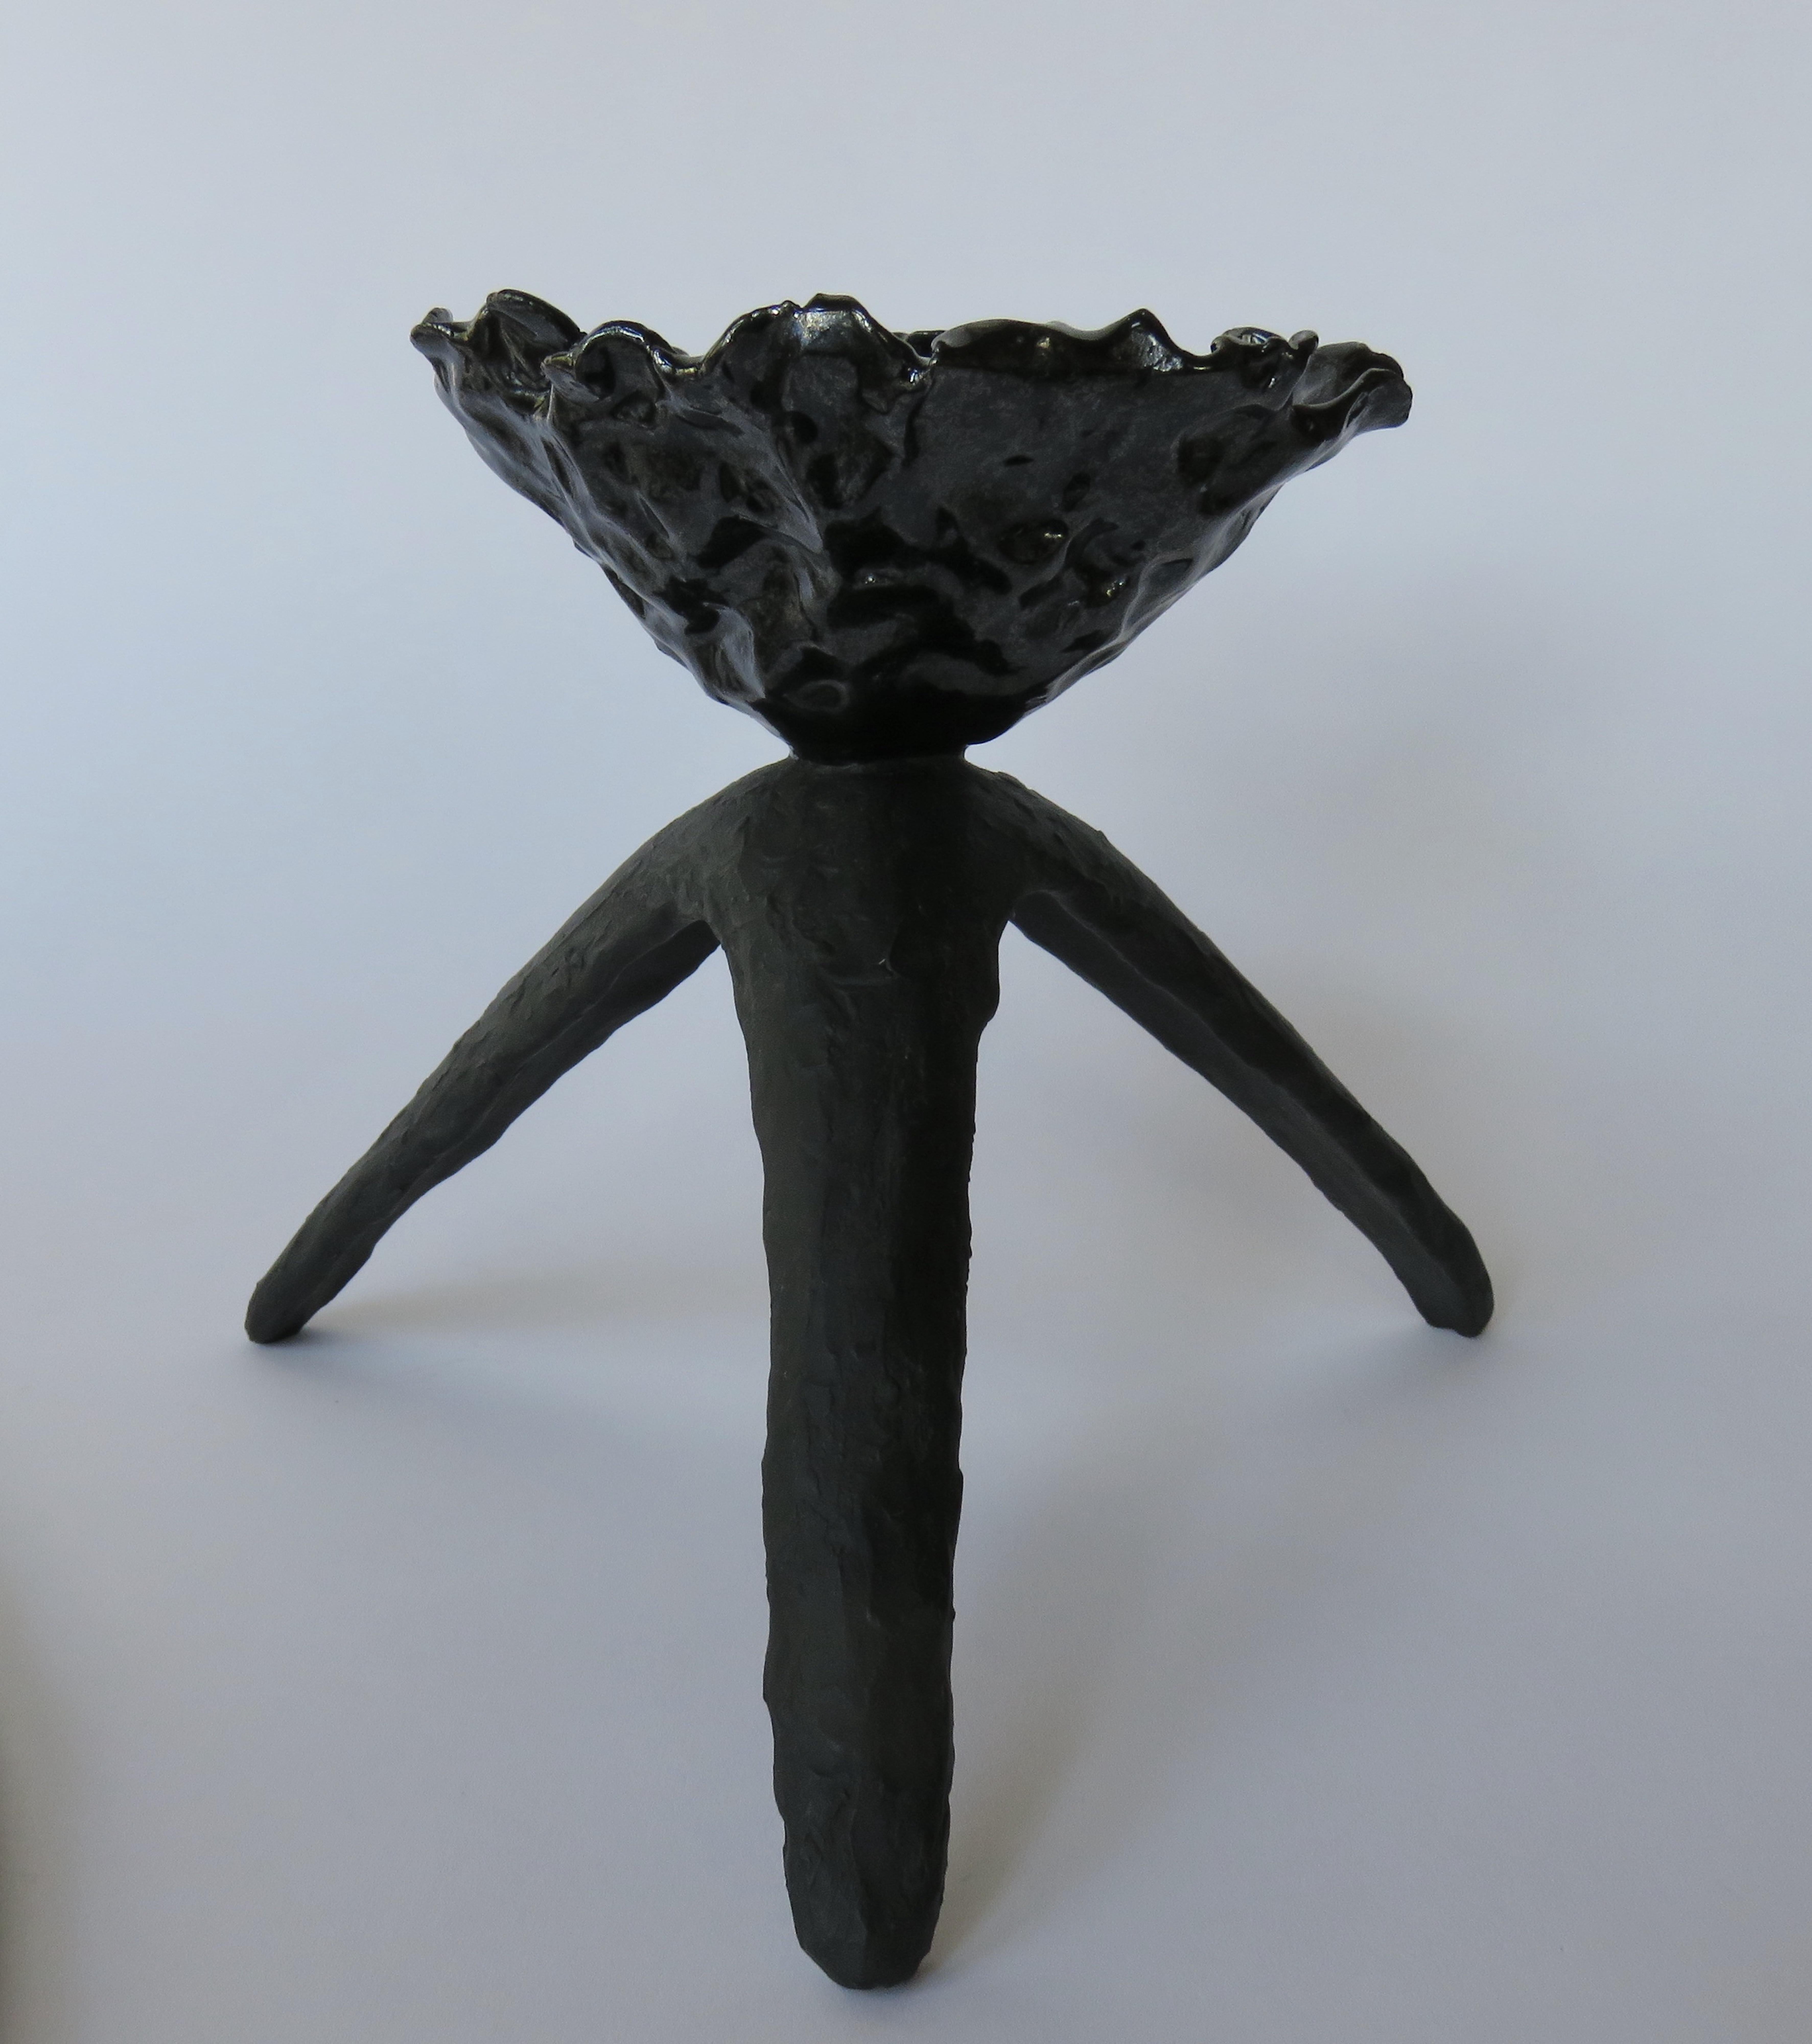 A freeform ceramic chalice with glossy black glaze on top and matte black tripod legs. The top 'cup' was pinched and crimped into this abstract form, then coated with a dramatic black glaze that shows all the highlights and movement in the piece. It